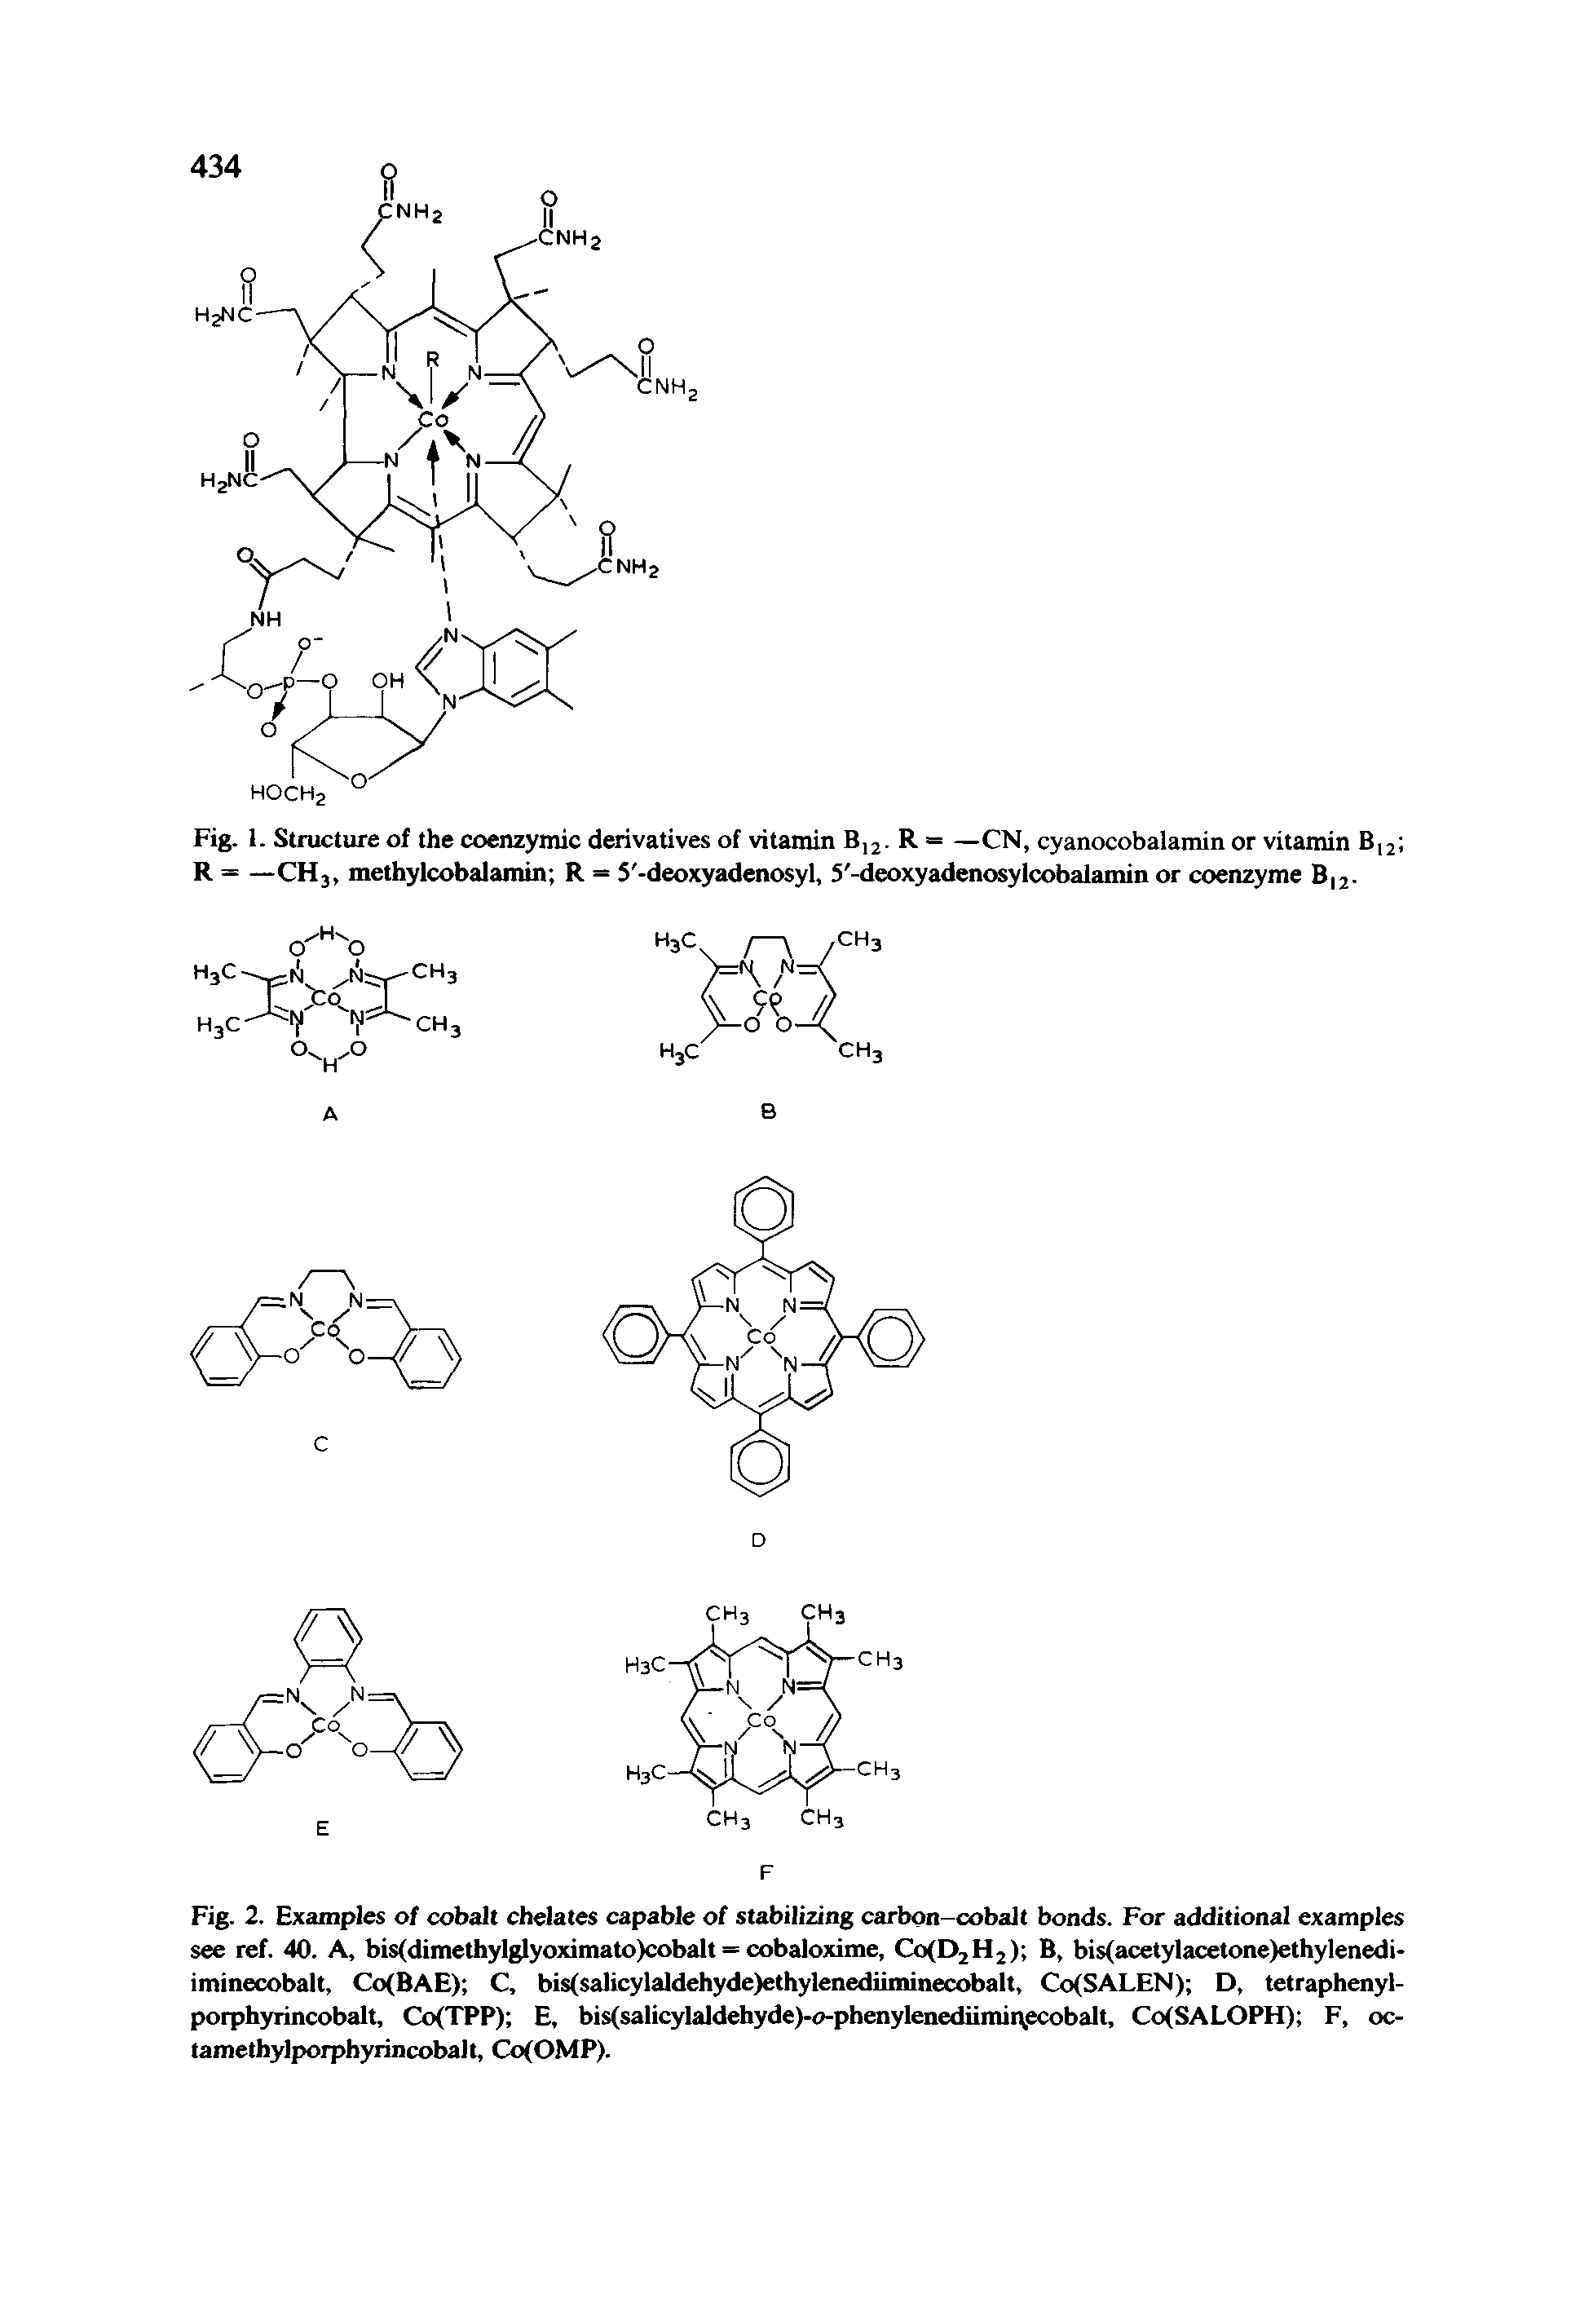 Fig. 2. Examples of cobalt chelates capable of stabilizing carbon-cobalt bonds. For additional examples see ref. 40. A, bis(dimethylglyoximato)cobalt = cobaloxime, CofDjHj) B, bis(acetylacetone)ethyIenedi-iminecobalt, Co(BAE) C, bis(salicylaldehyde)ethylenediiminecobalt, Co(SALEN) D, tetraphenyl-porphyrincobalt, Co(TPP) E, bis(salicylaldehyde)-o-phenylenediimit, ecobalt, CofSALOPH) F, oc-tamethylporphyrincobalt, Co(OMP).